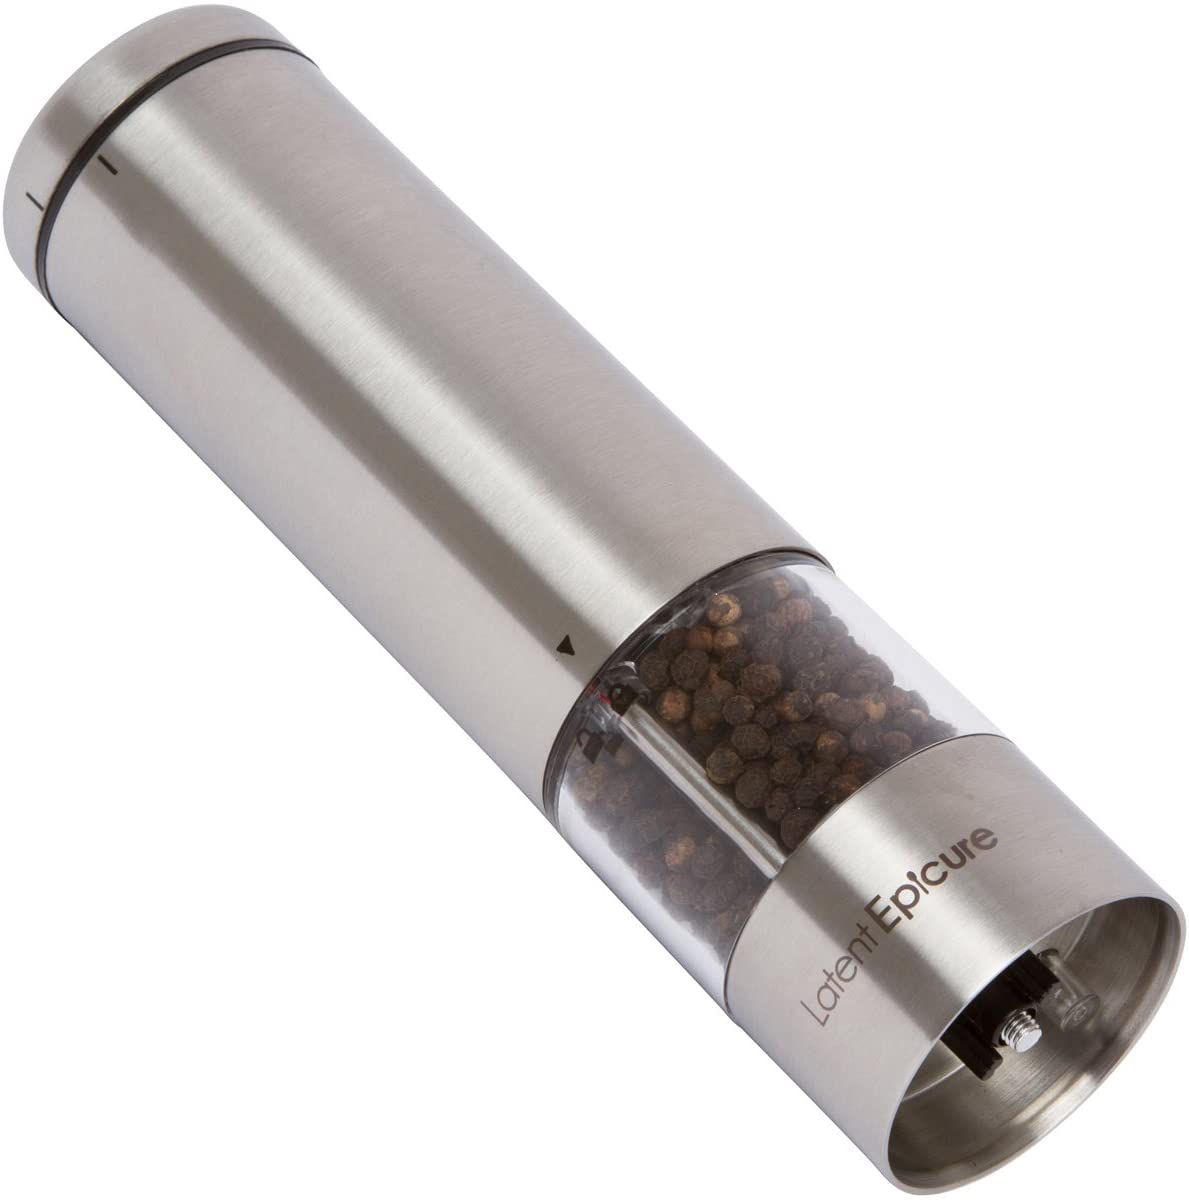 Stainless steel pepper mill with peppercorns inside